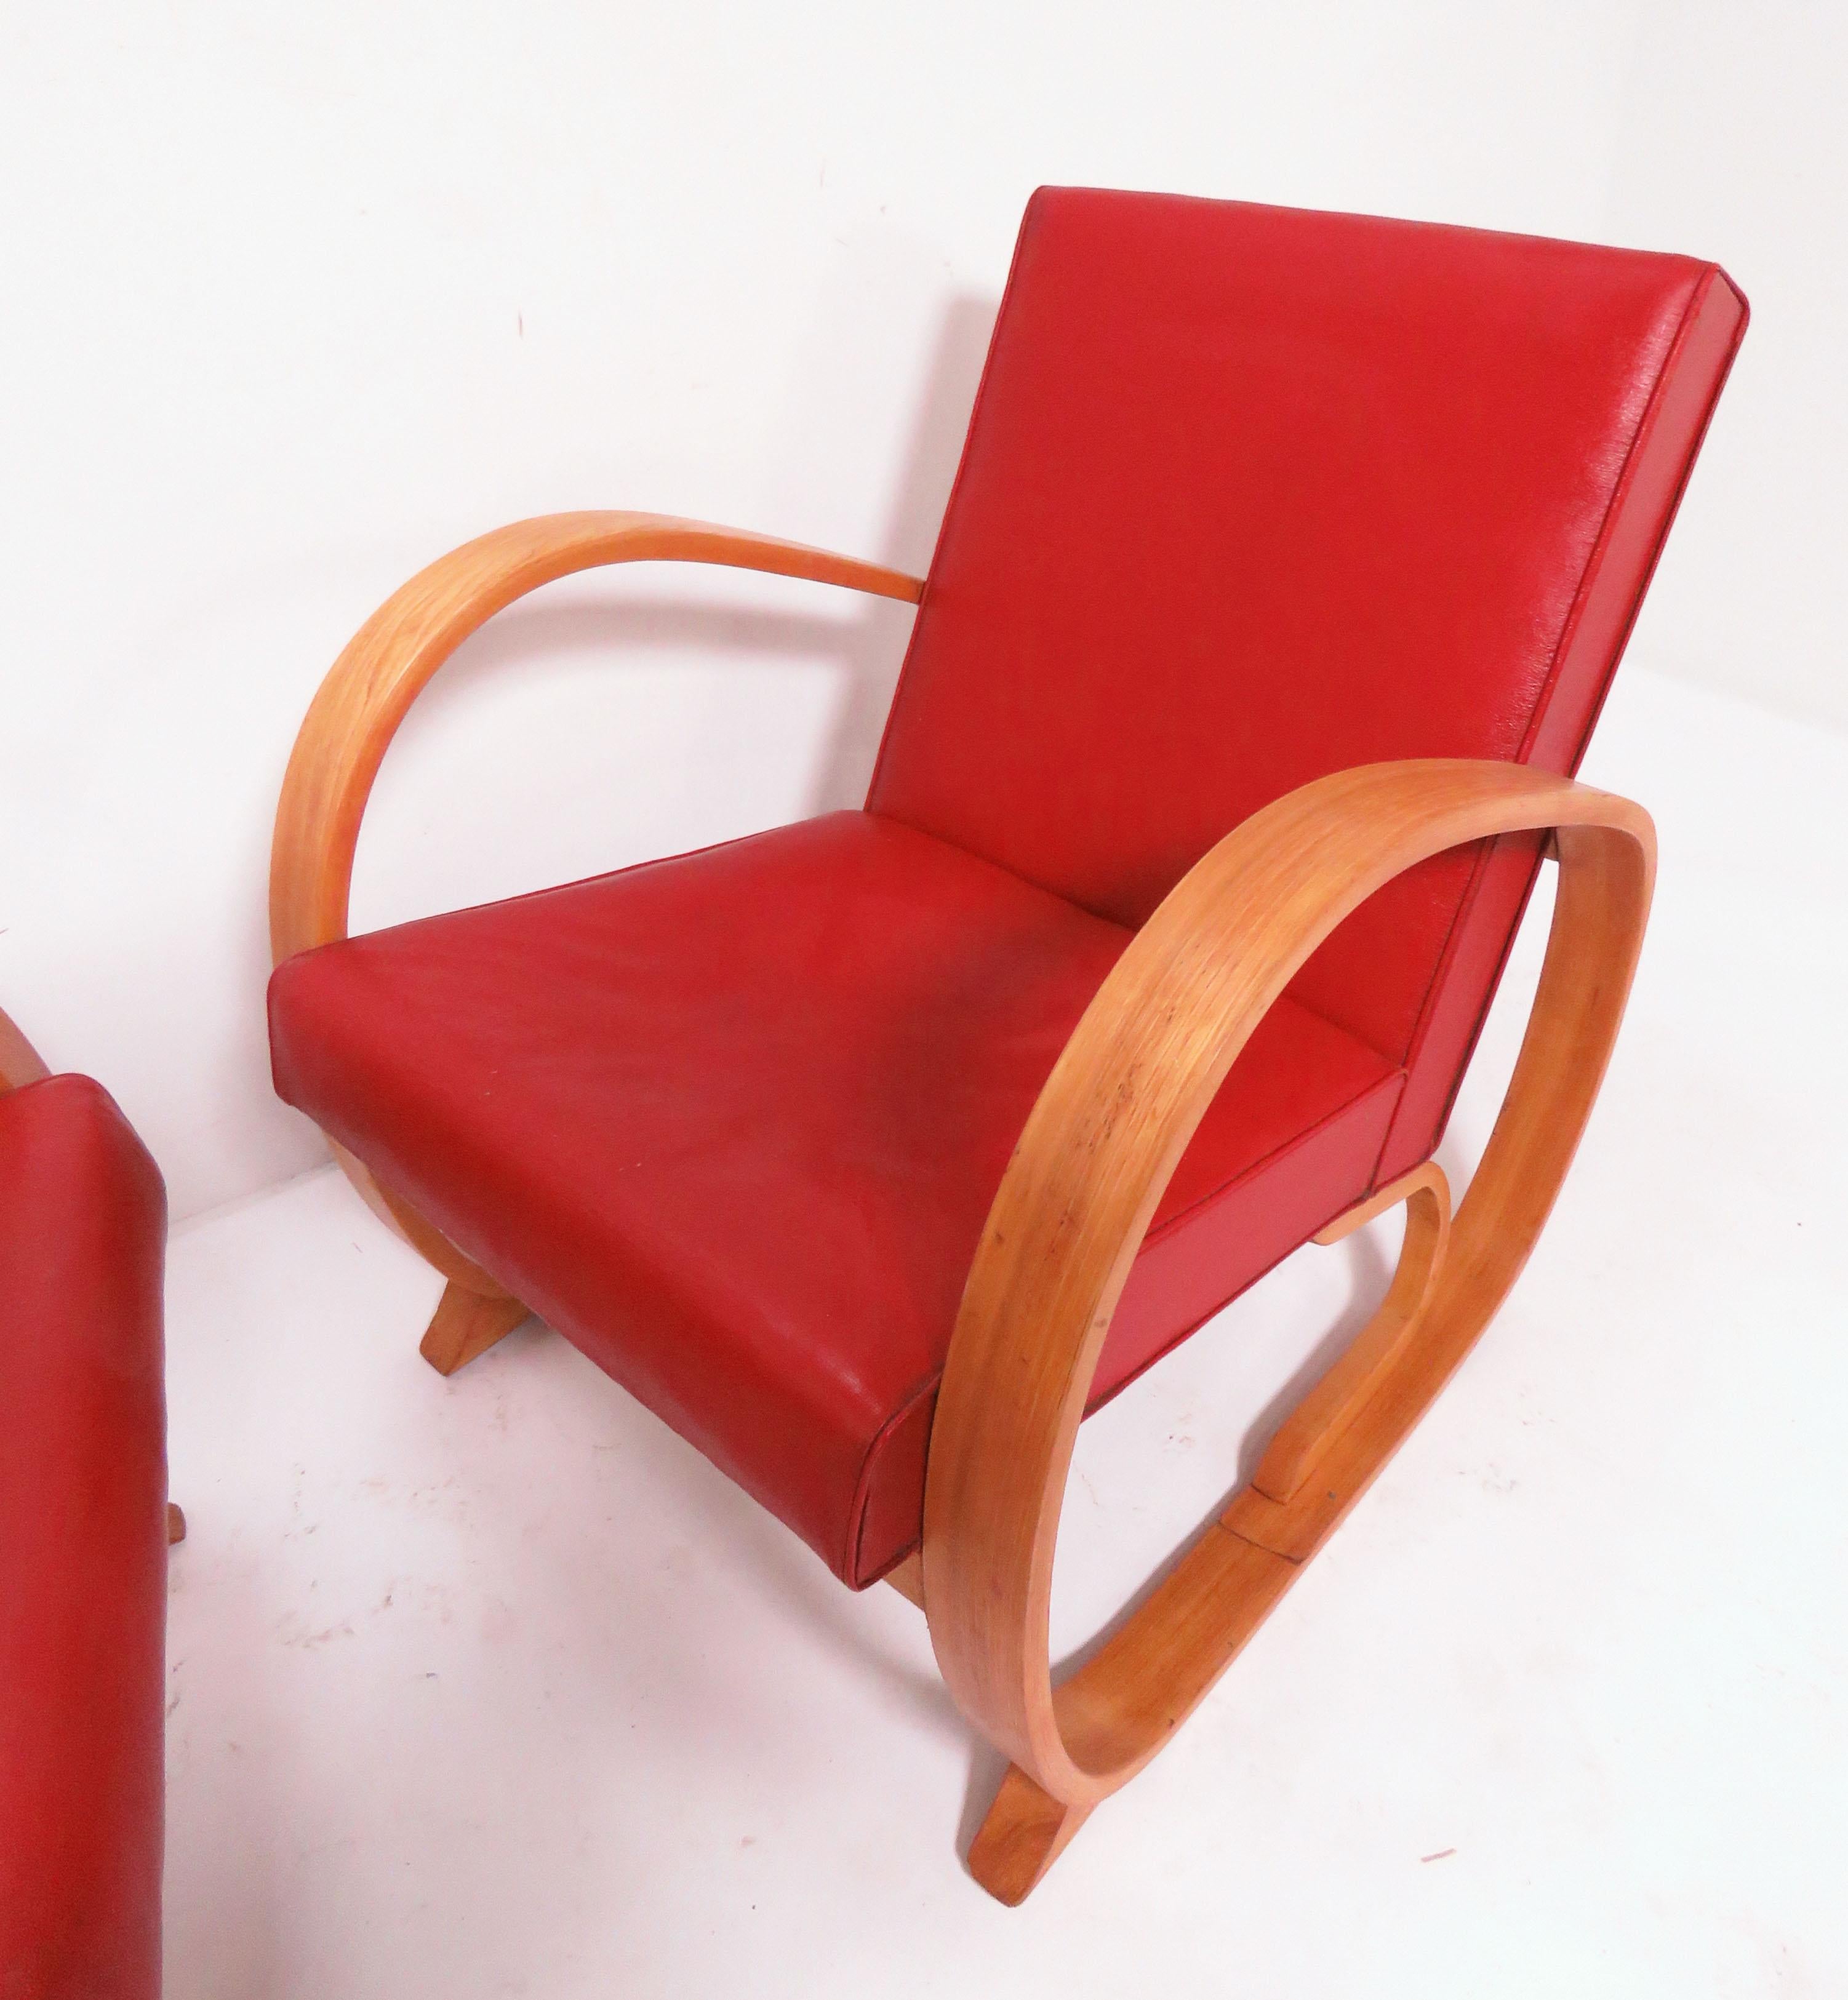 North American Pair of Art Deco Bentwood Club Chairs, circa 1930s